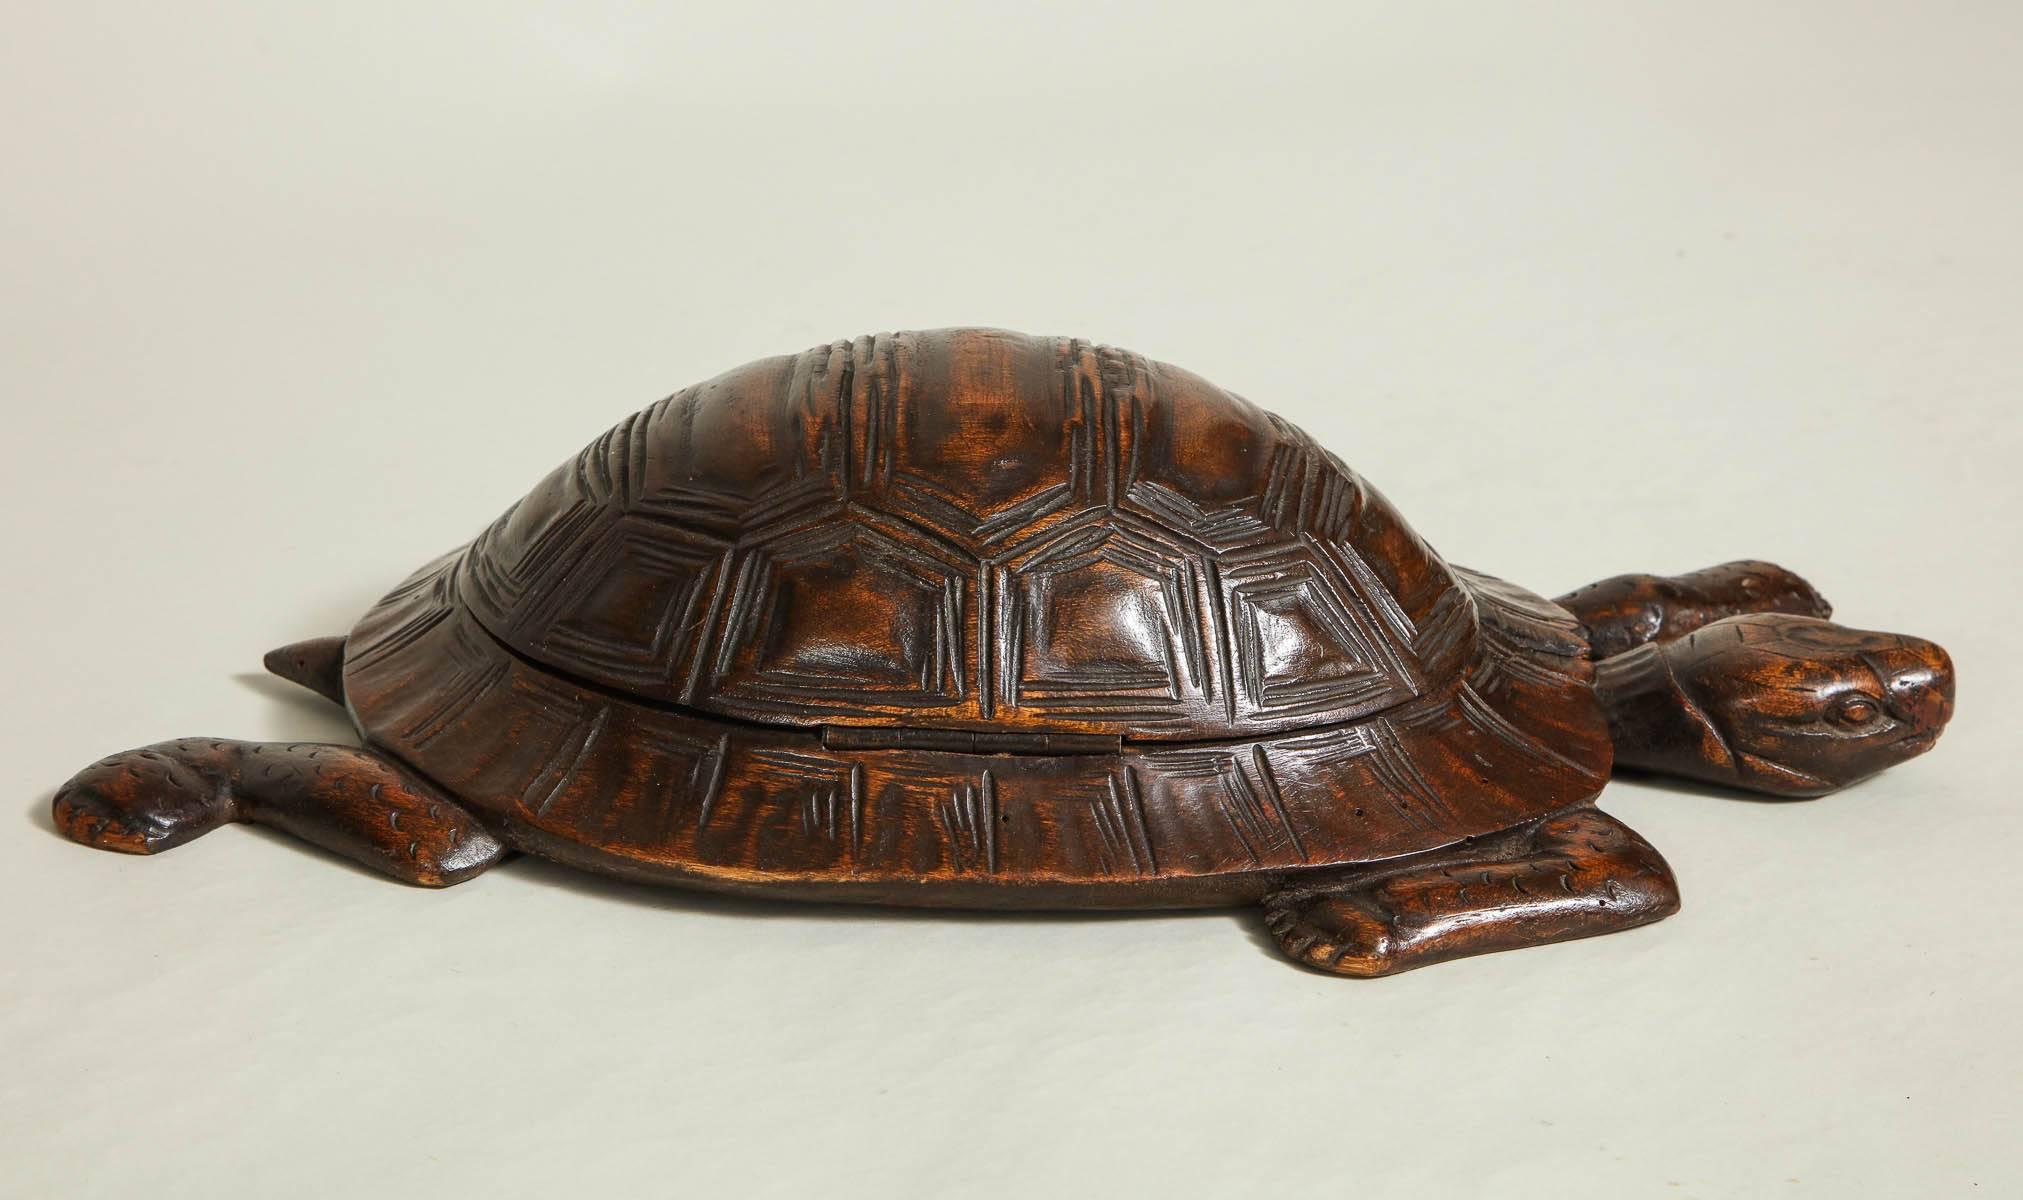 A charming box in the shape of a box turtle, carved of wood with legs, head and tail and hinged shell that lifts to reveal a lined interior for storing jewelry. Good color and patina, English, 19th century.